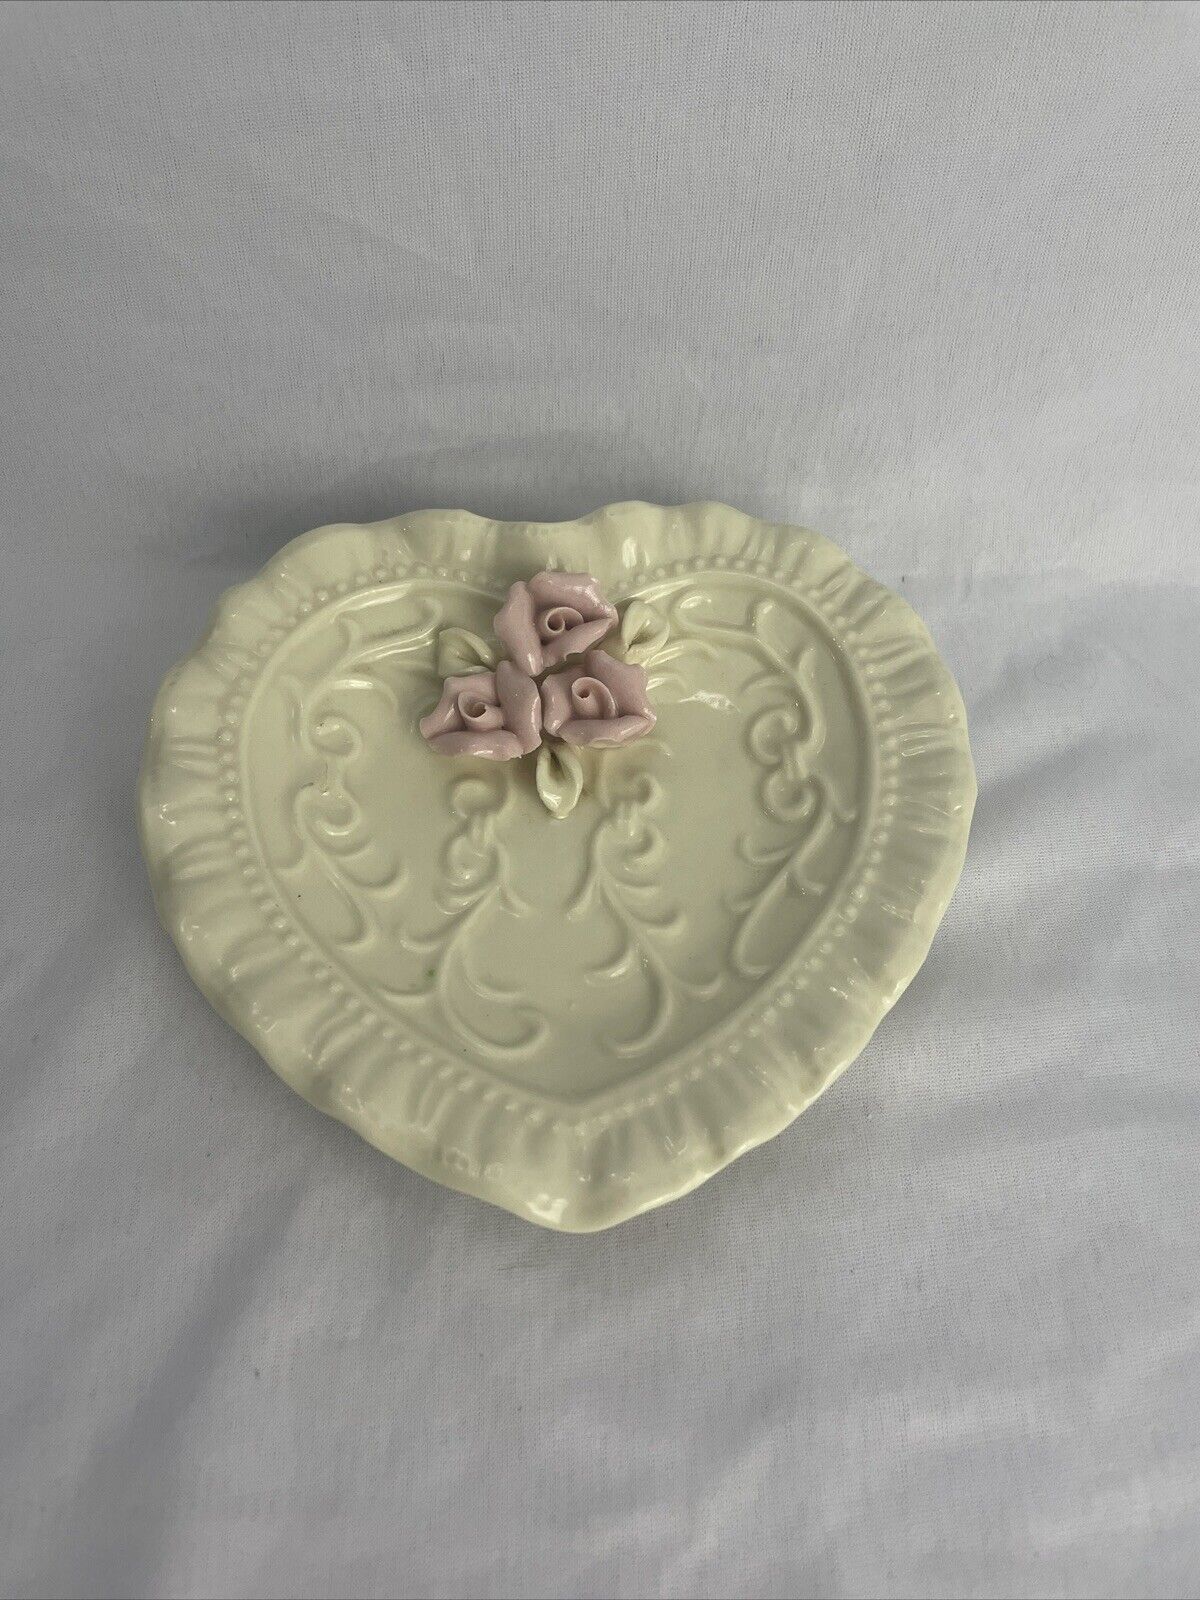 Vintage Ceramic Heart Shaped Trinket Dish With Pink Roses